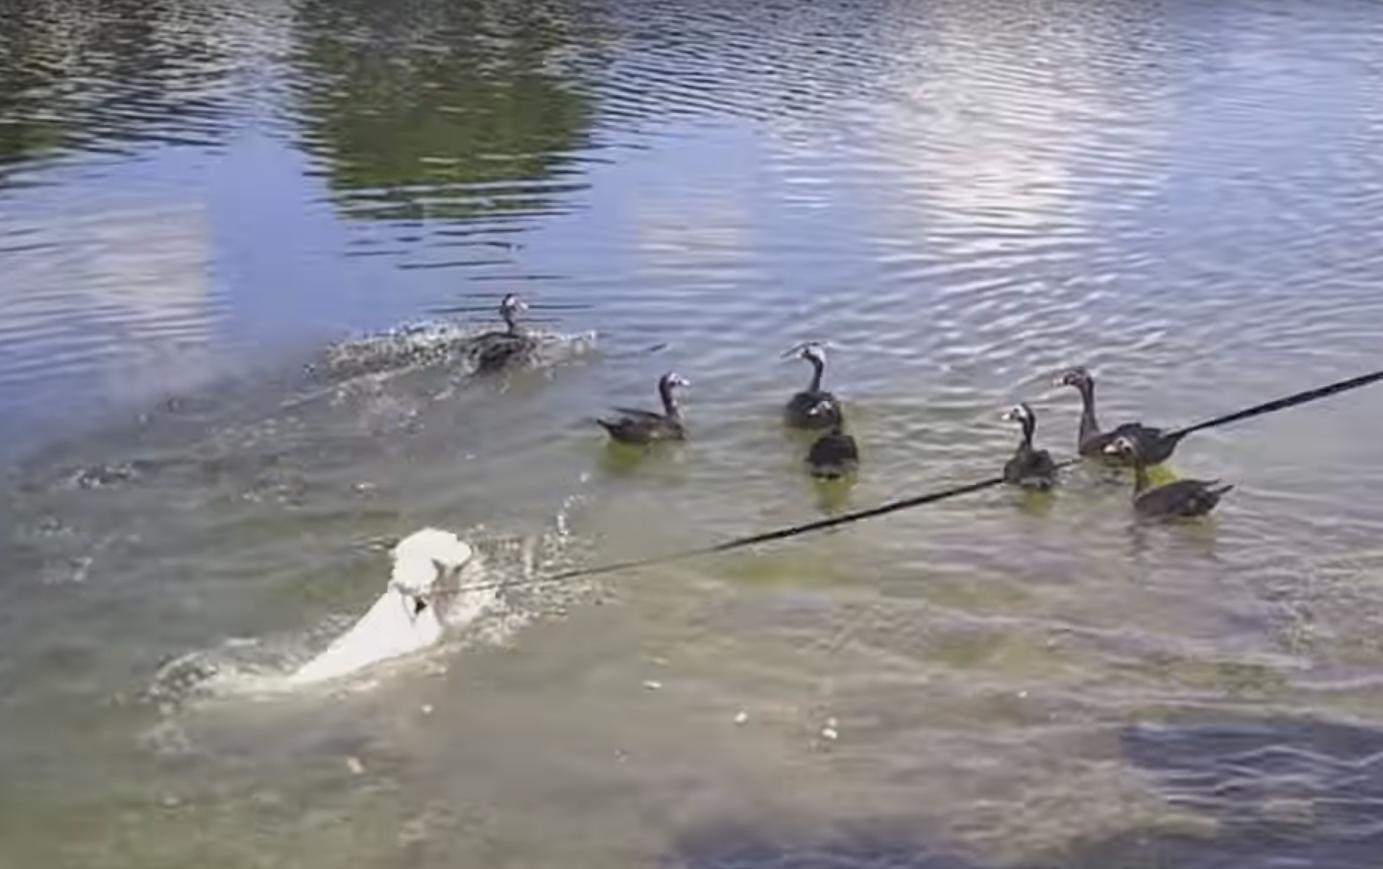 Dog's First Swim Is to Chase Ducks in the Water